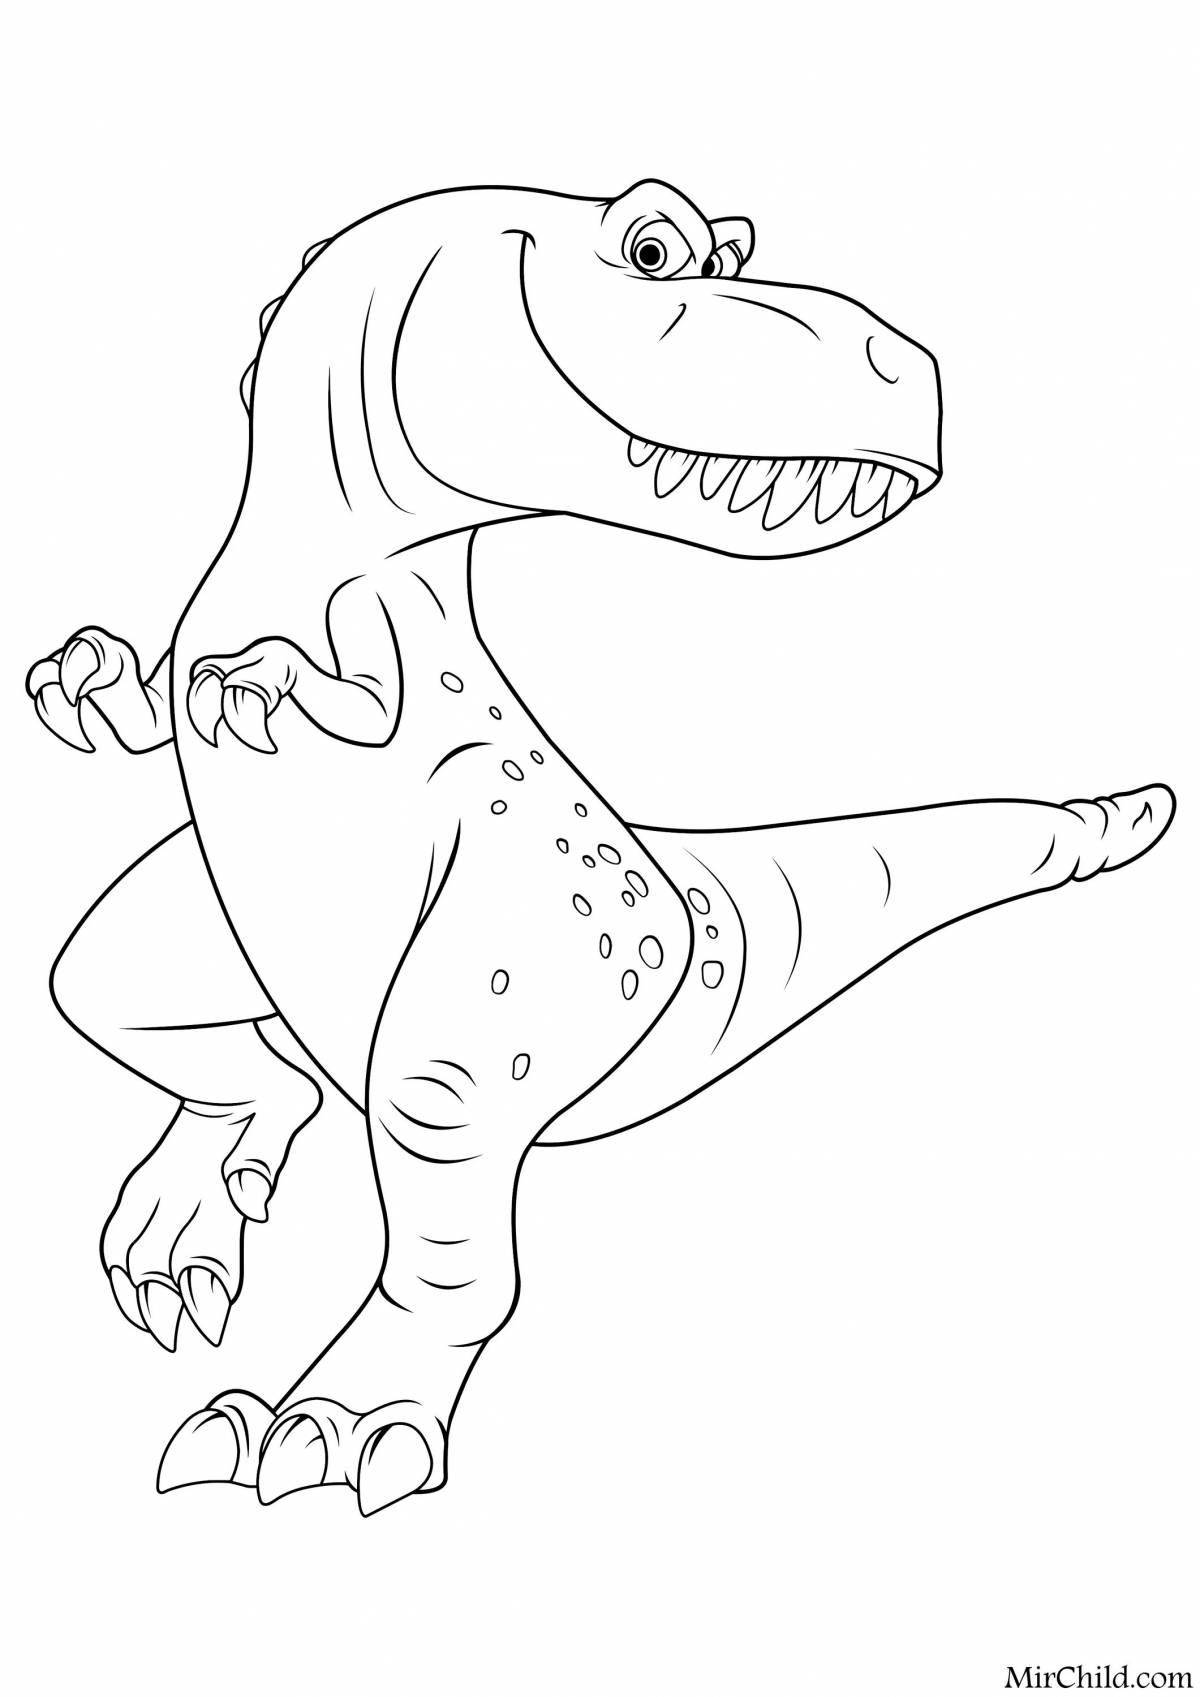 Majestic dinosaur coloring pages